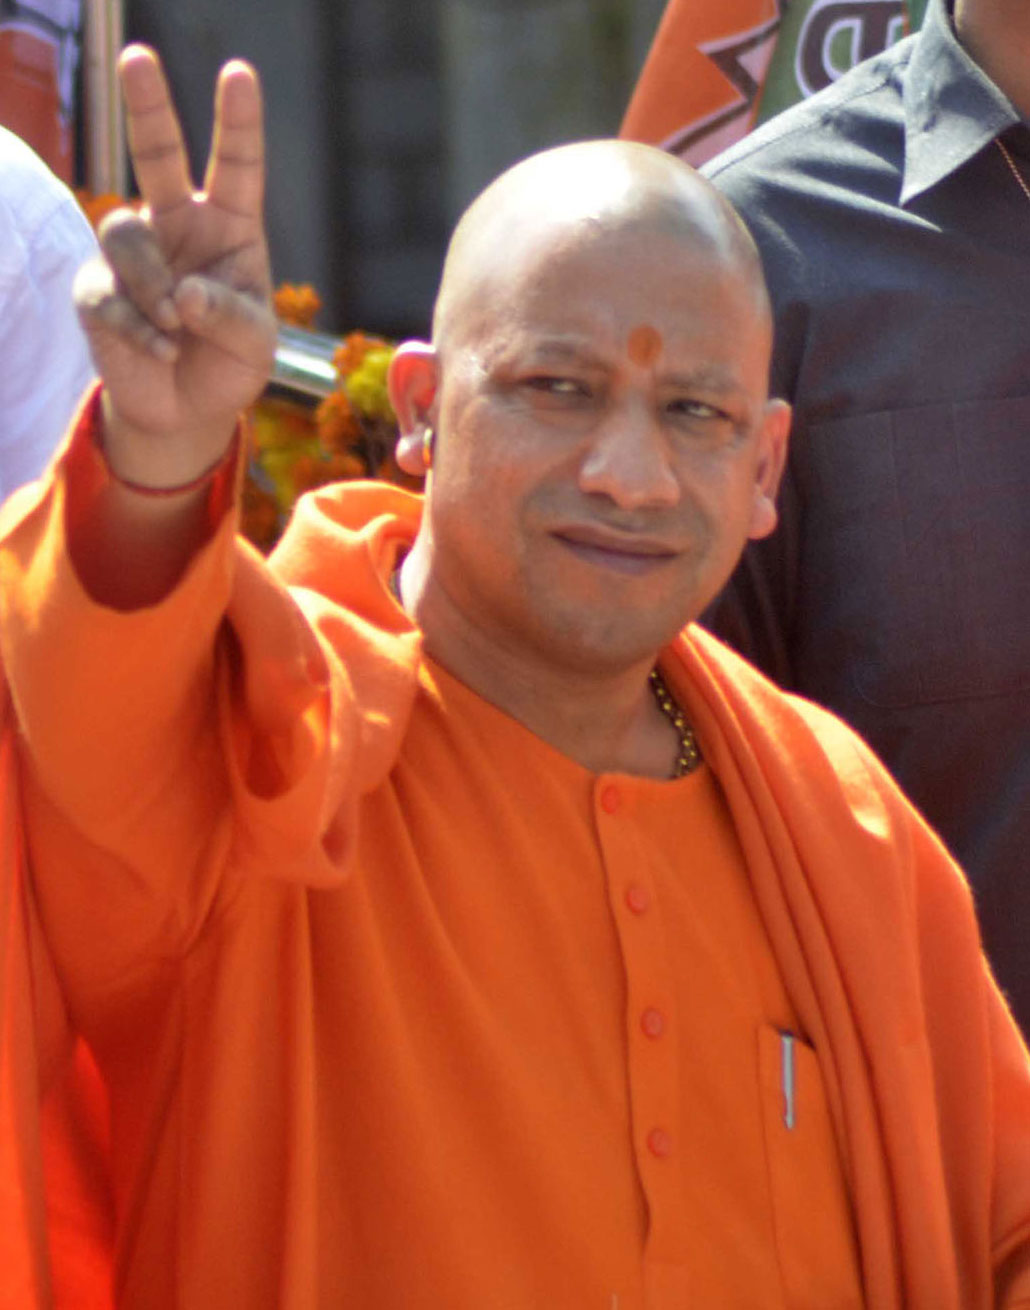 Yogi Adityanath did not mention a Ram temple even once in his 20-minute speech